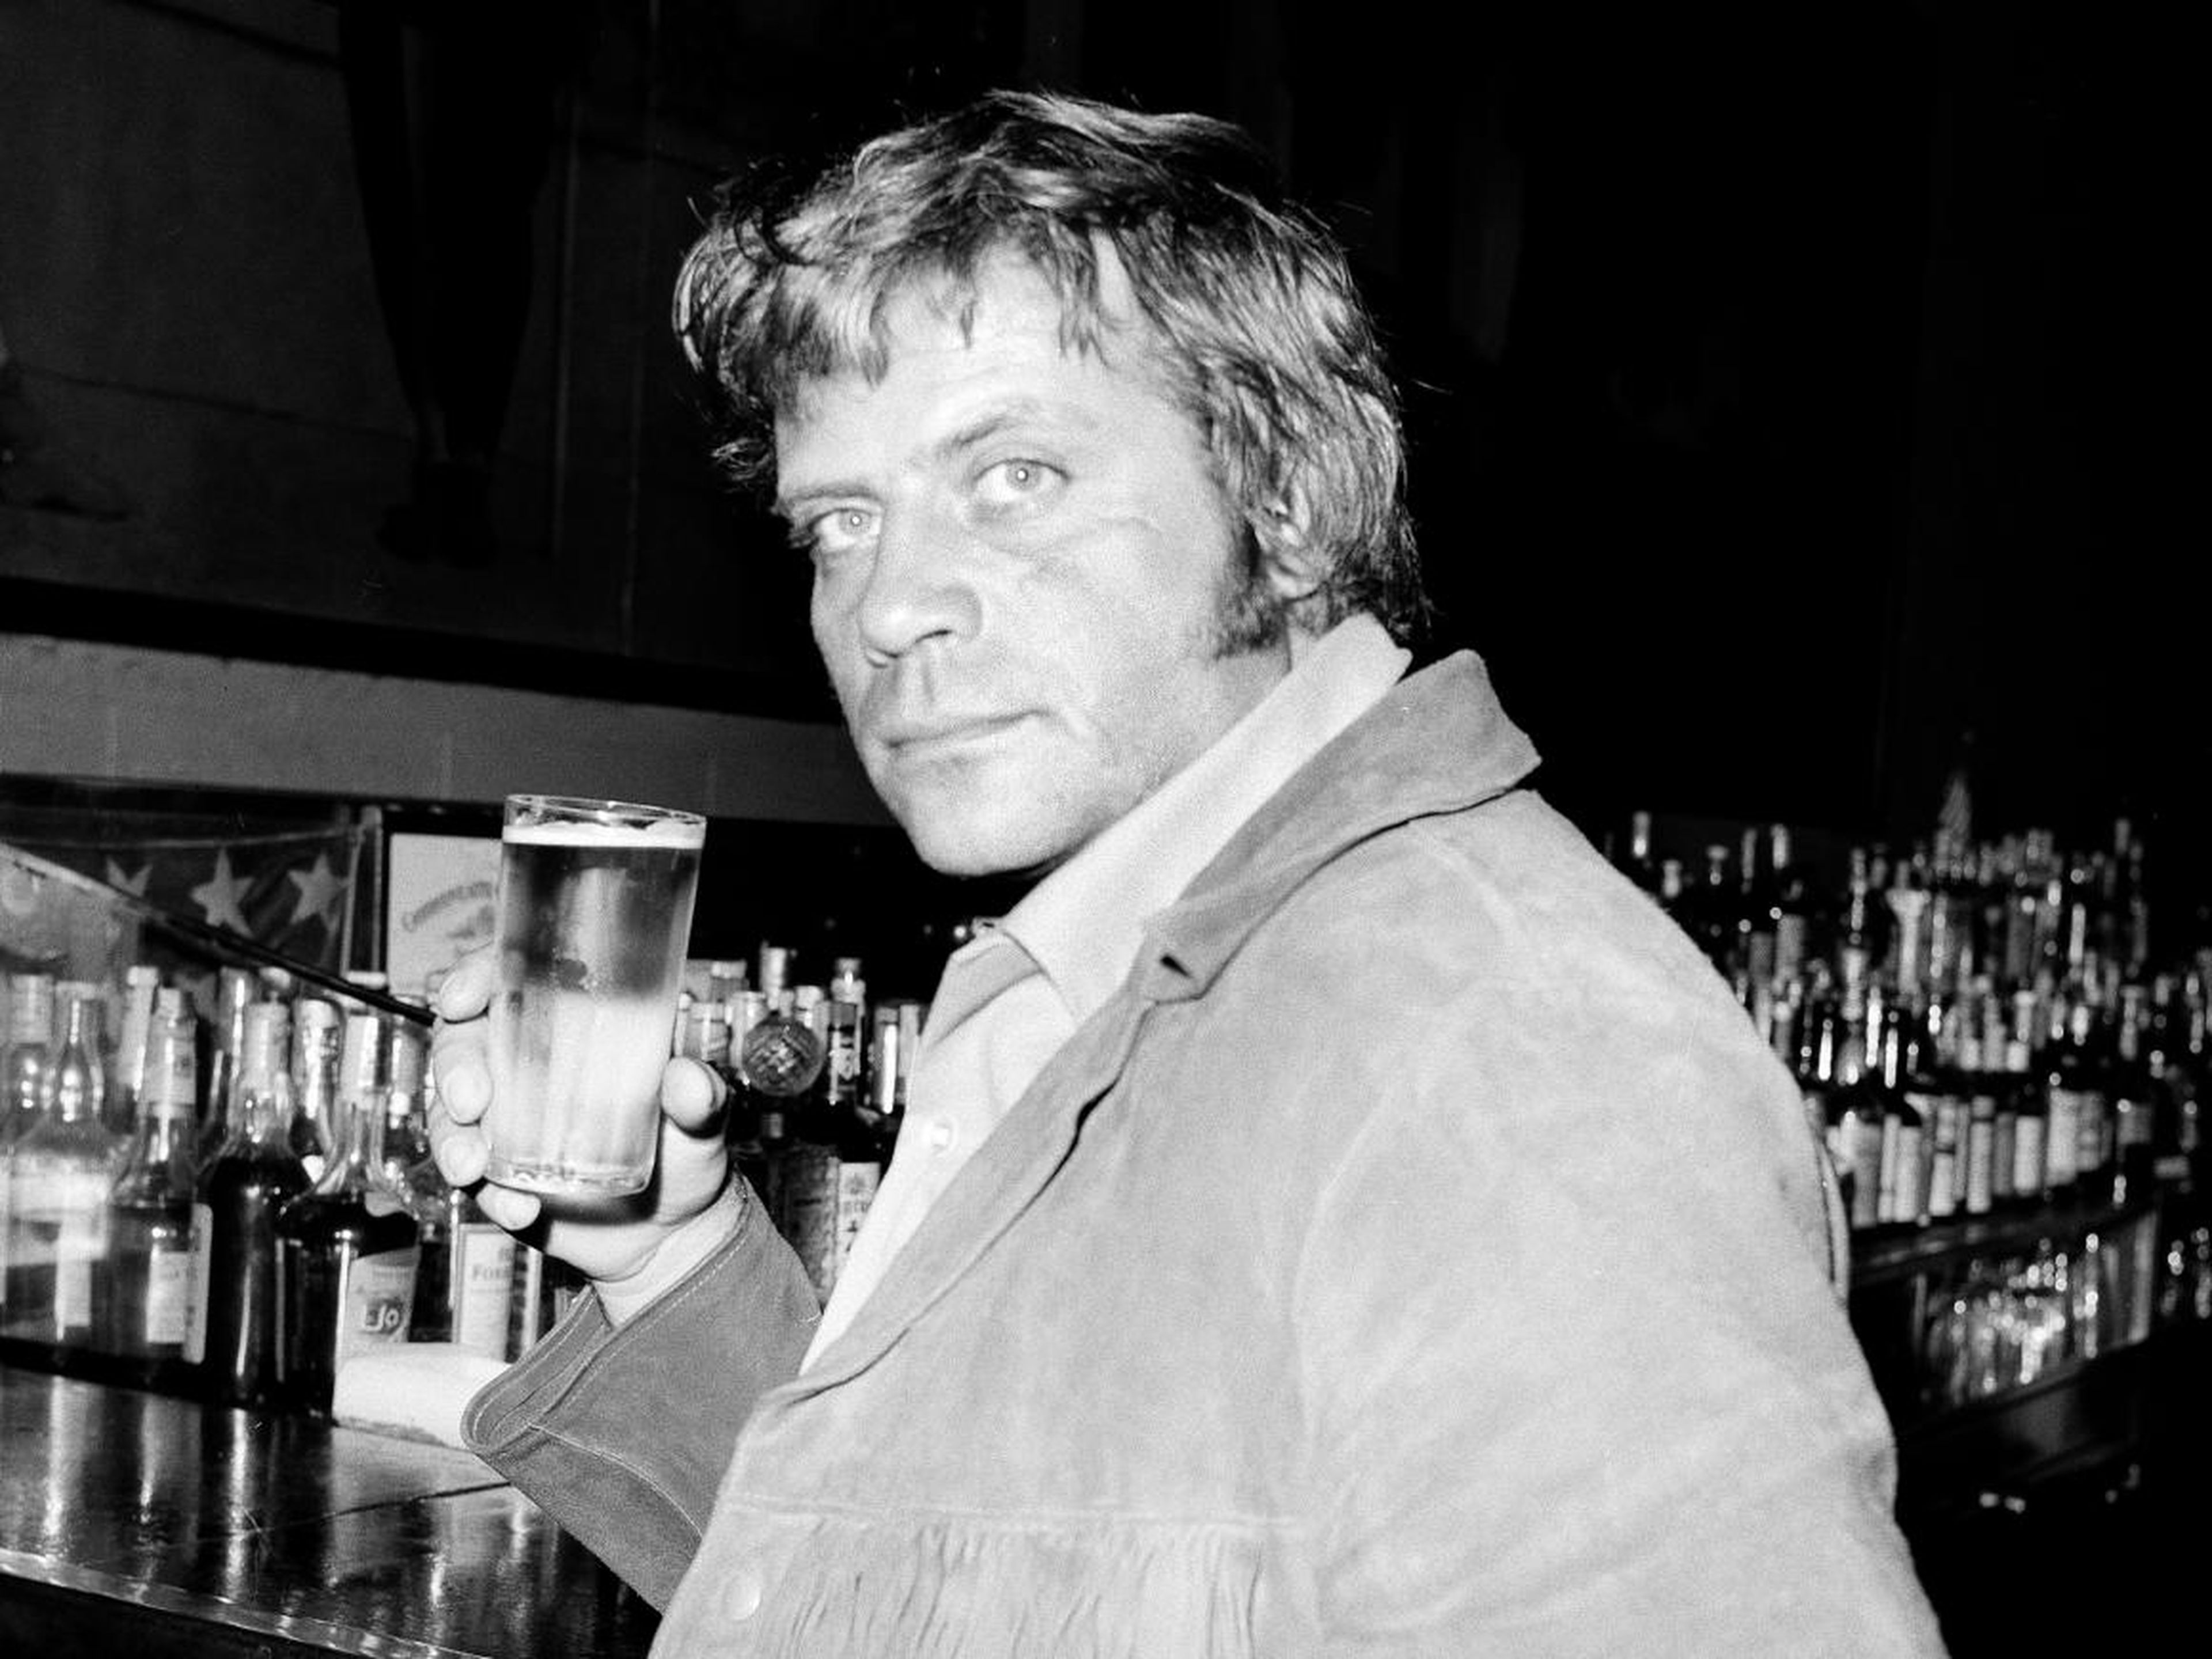 British film star Oliver Reed is seen in the bar at the St. Regis Hotel in New York in 1970.